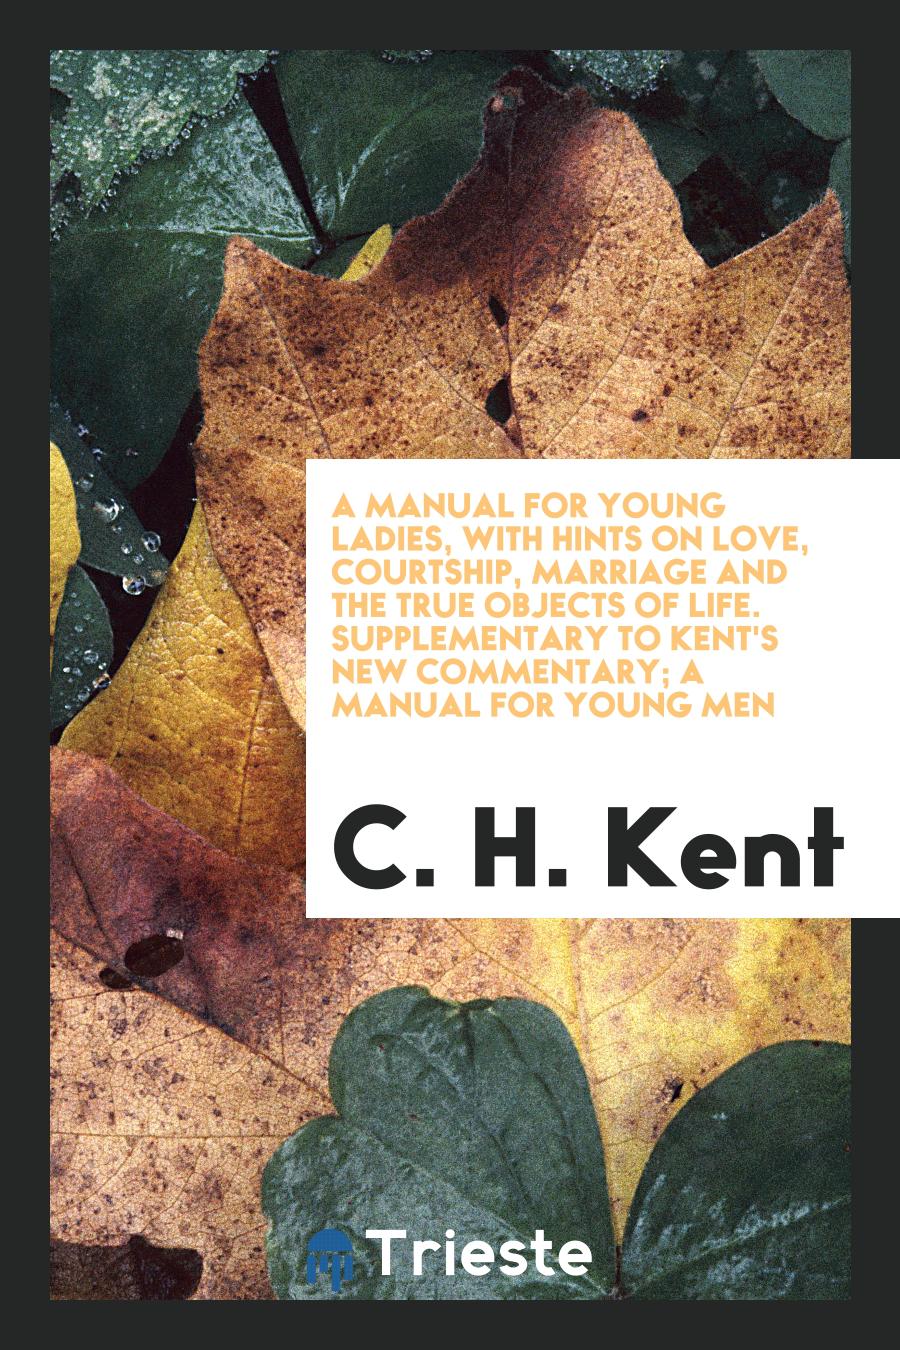 A Manual for Young Ladies, with Hints on Love, Courtship, Marriage and the True Objects of Life. Supplementary to Kent's New Commentary; A Manual for Young Men